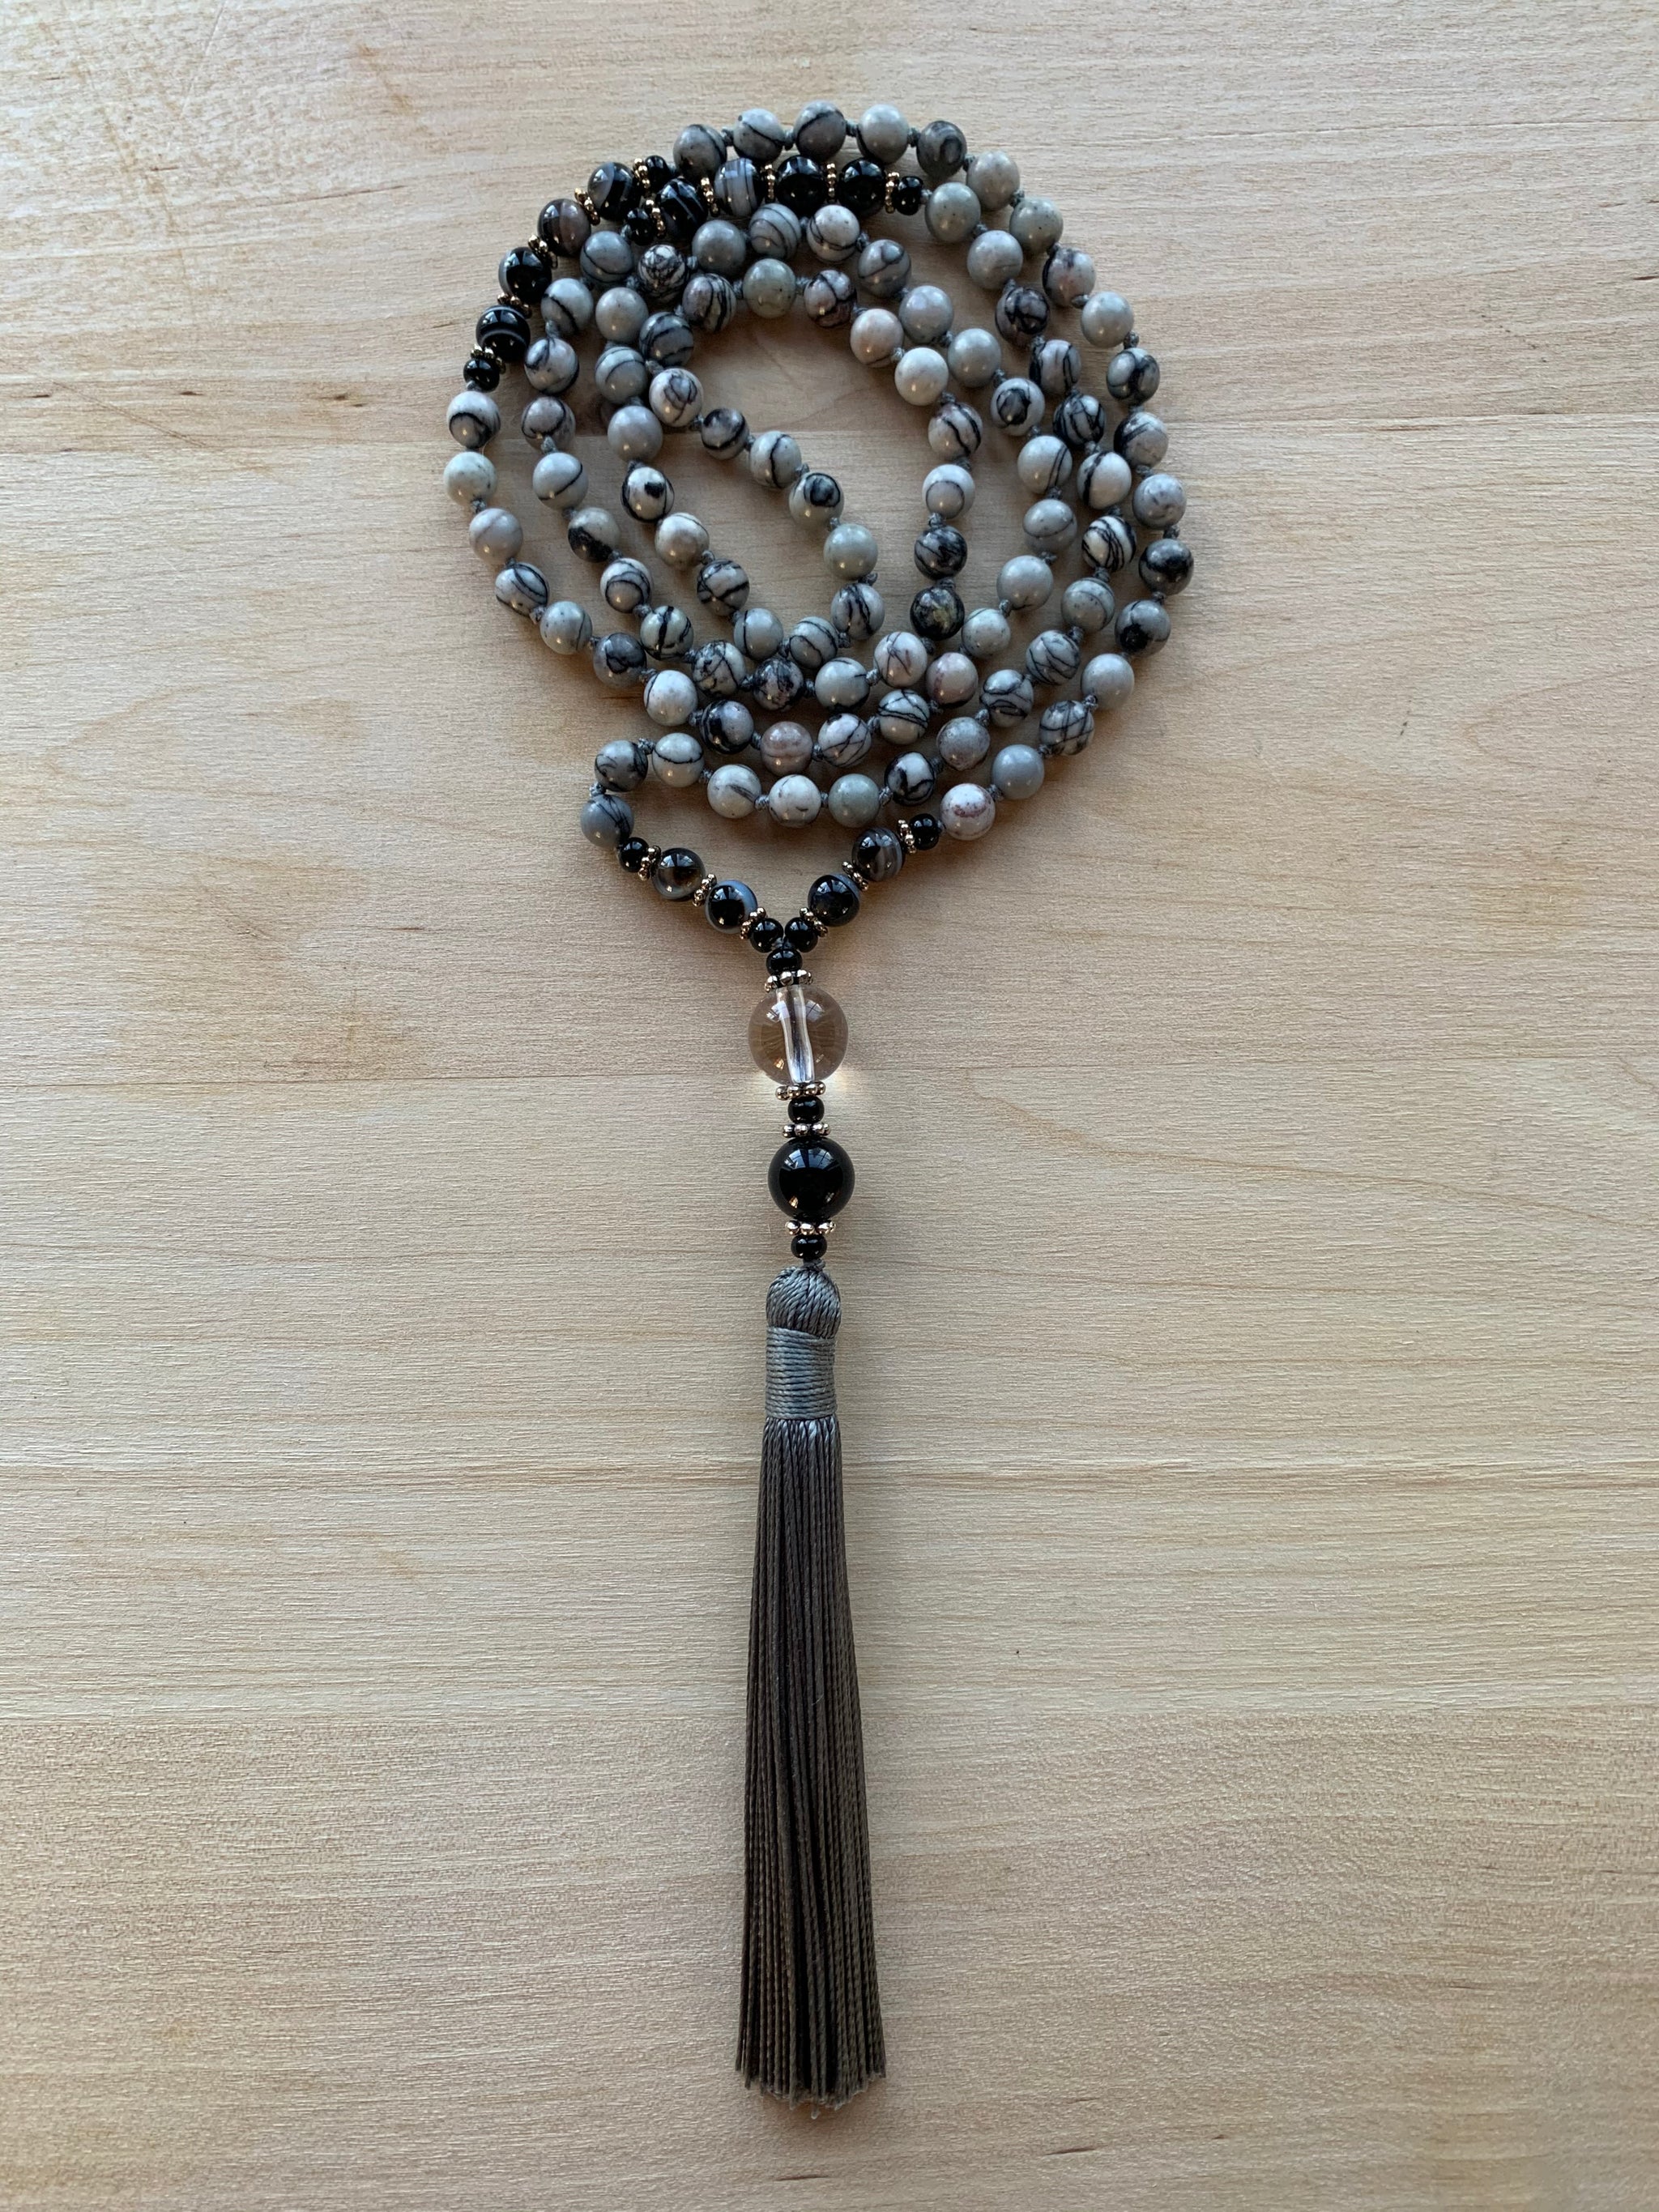 Transformation Hand-Made Knotted 108 Bead 6mm Meditation Mala Necklace,  Moss Agate, Sandalwood, & Howlite